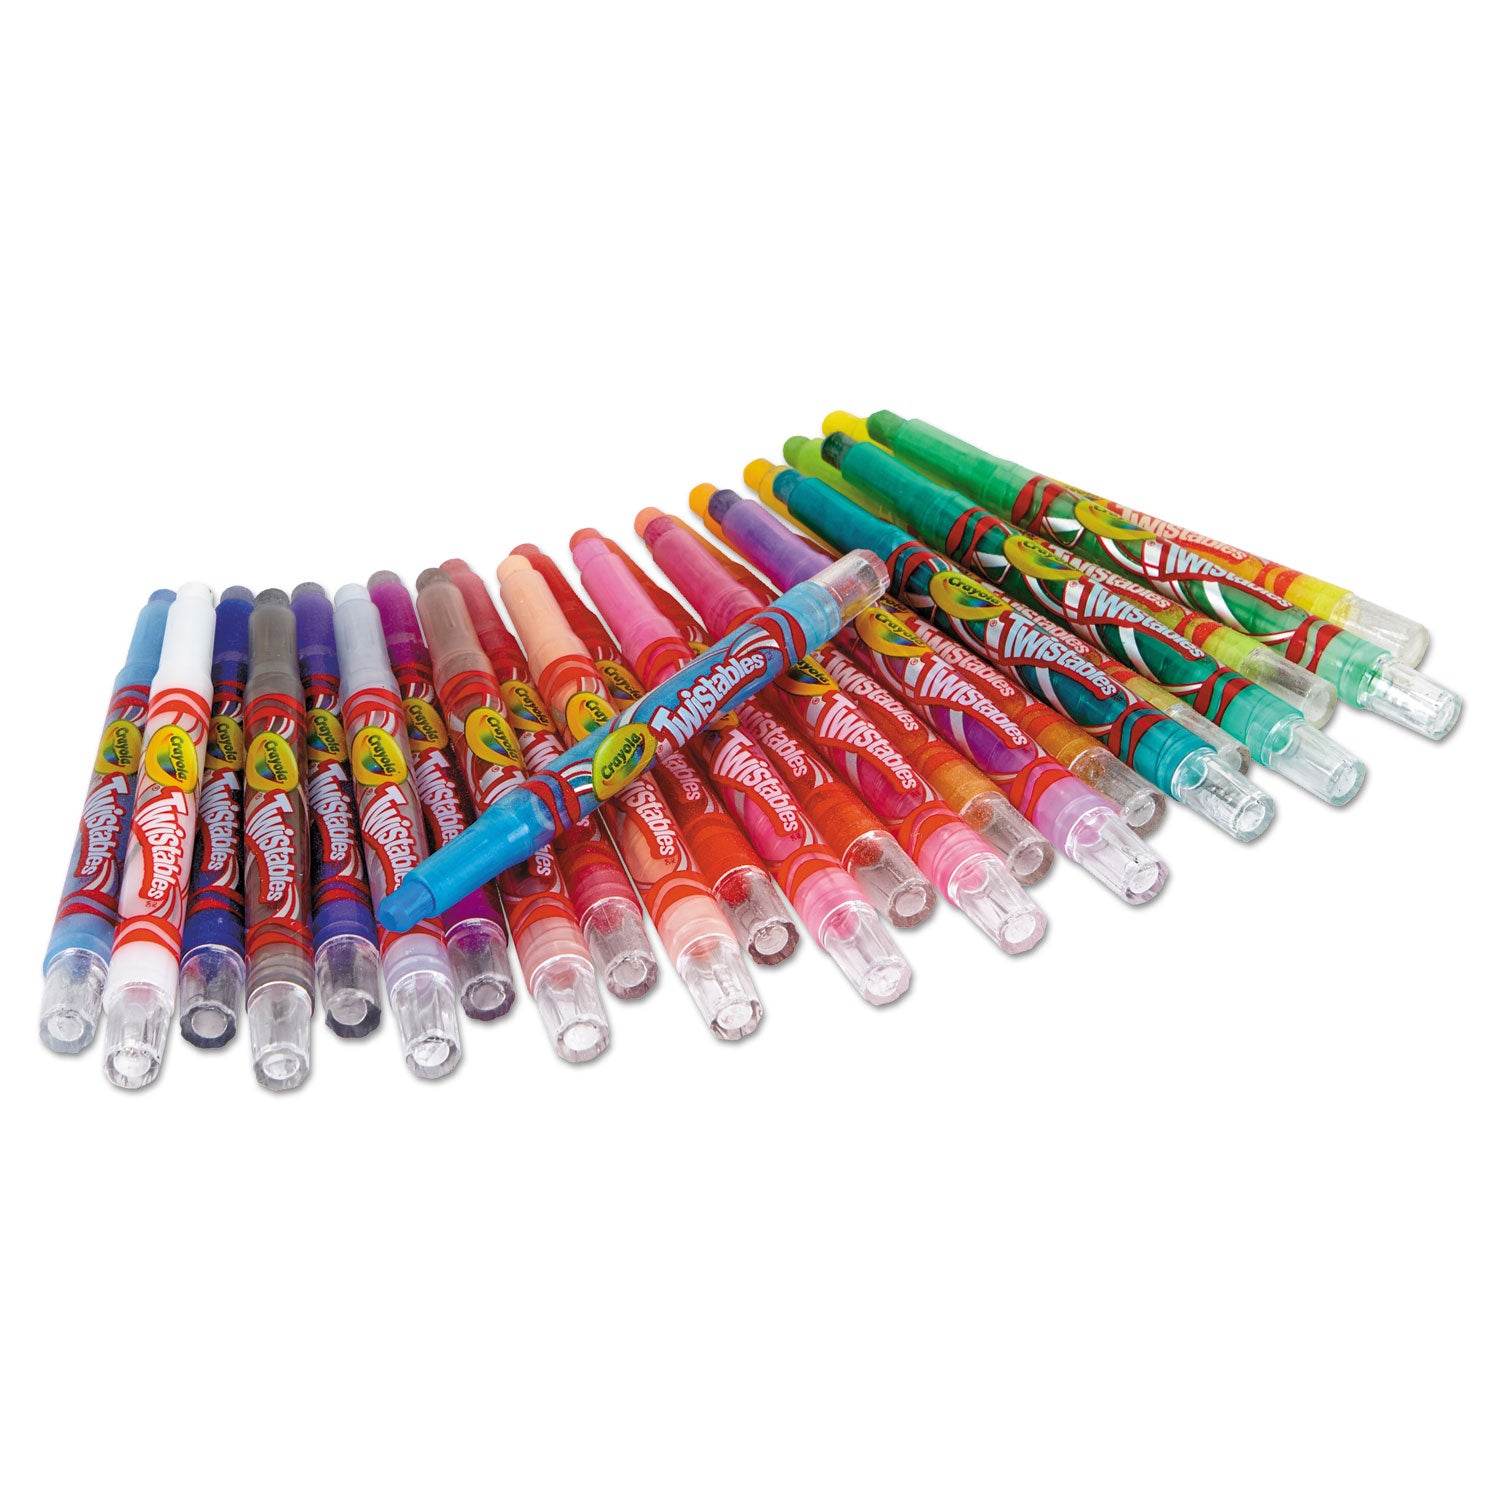 Twistables Mini Crayons, 24 Colors/Pack - 